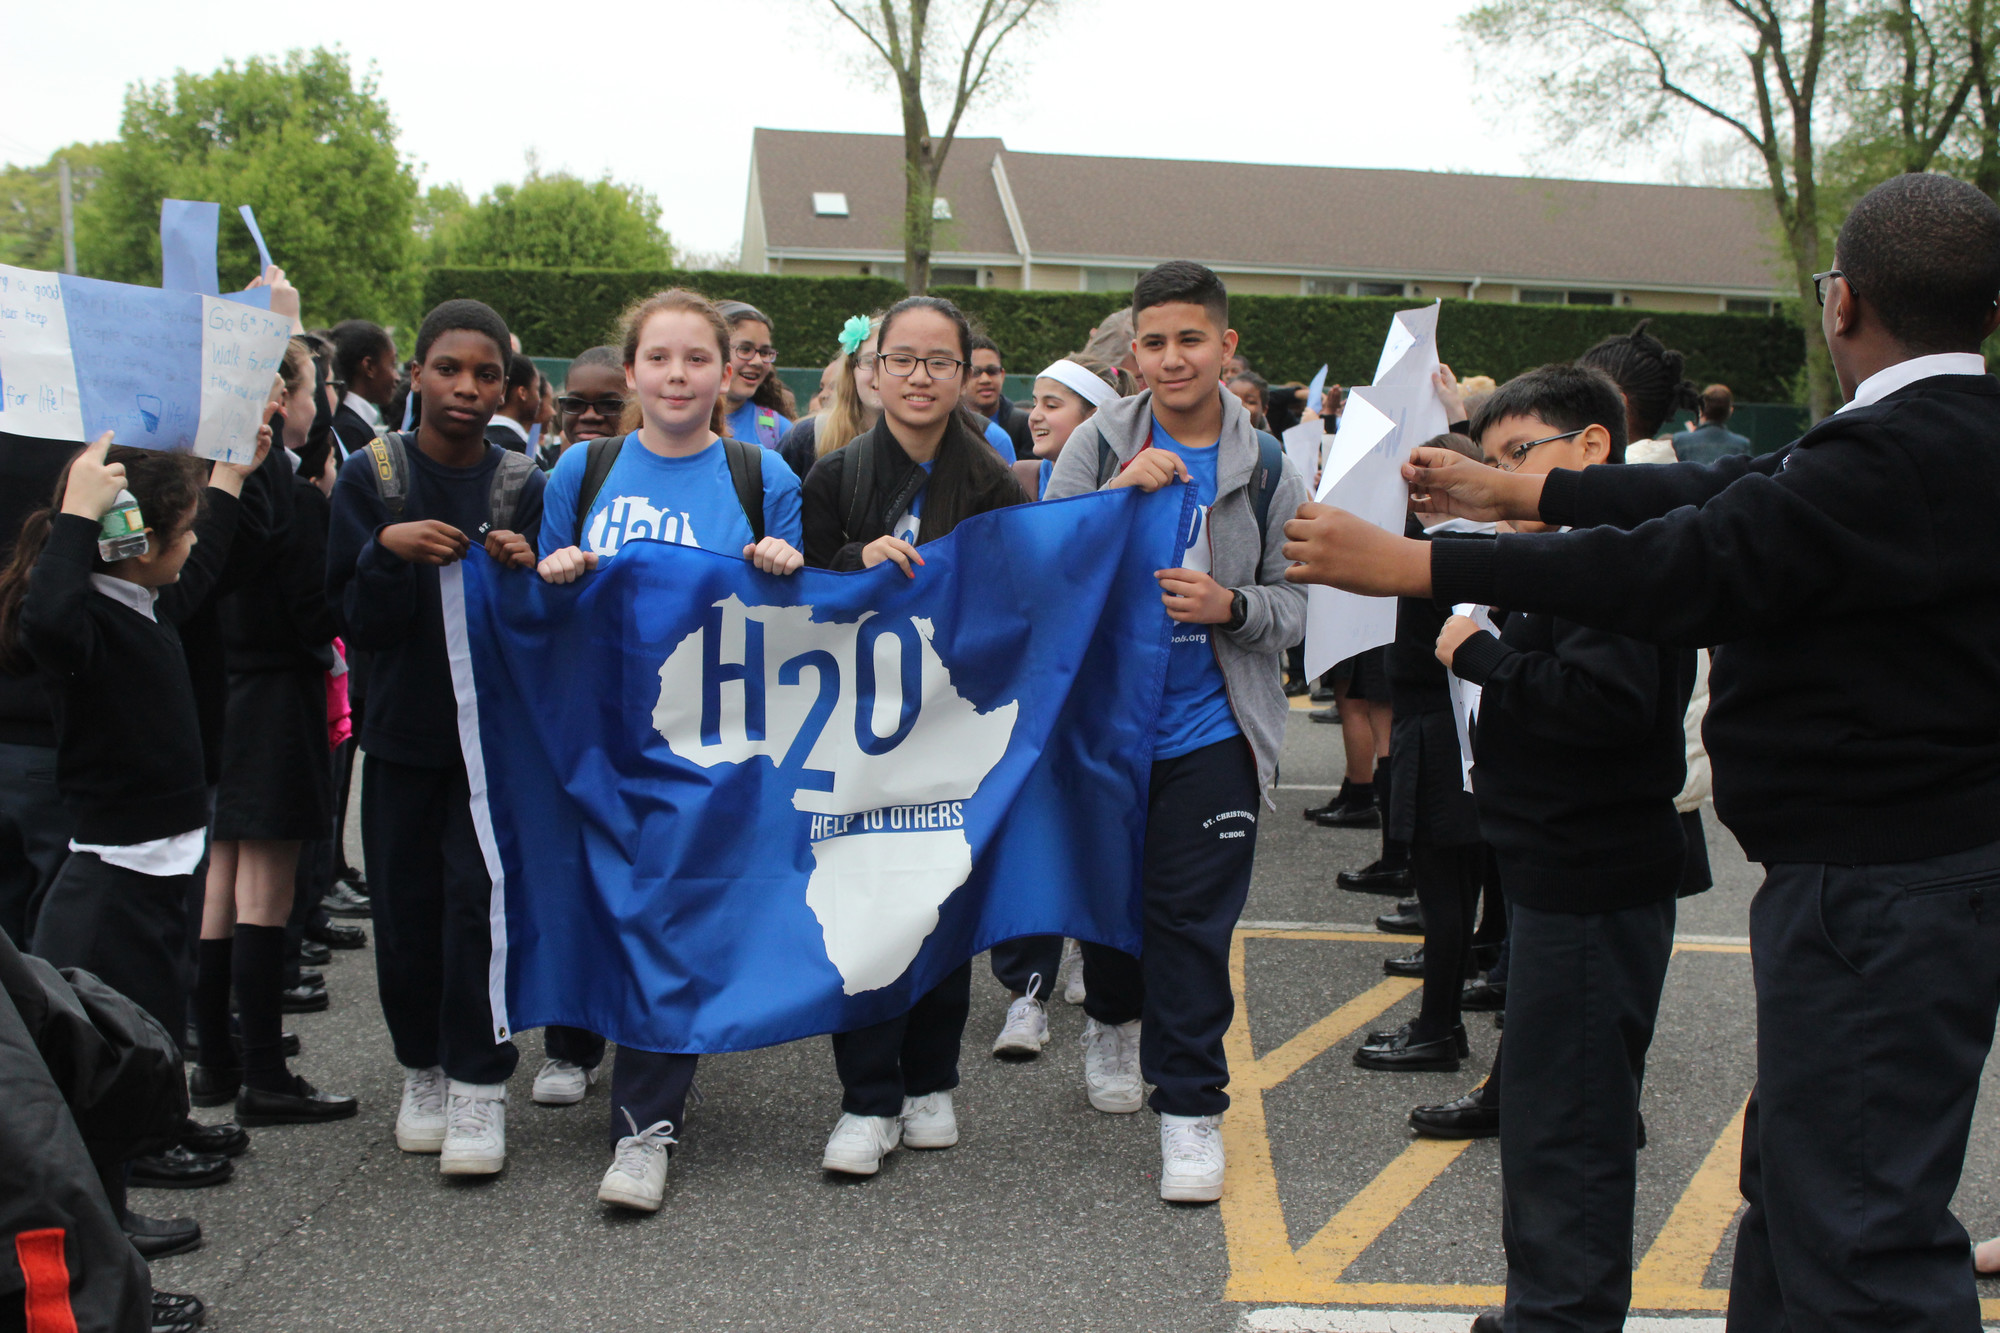 About seventy students headed out from St. Christopher's School to walk three miles on Friday. Photos by Theresa Press/Herald